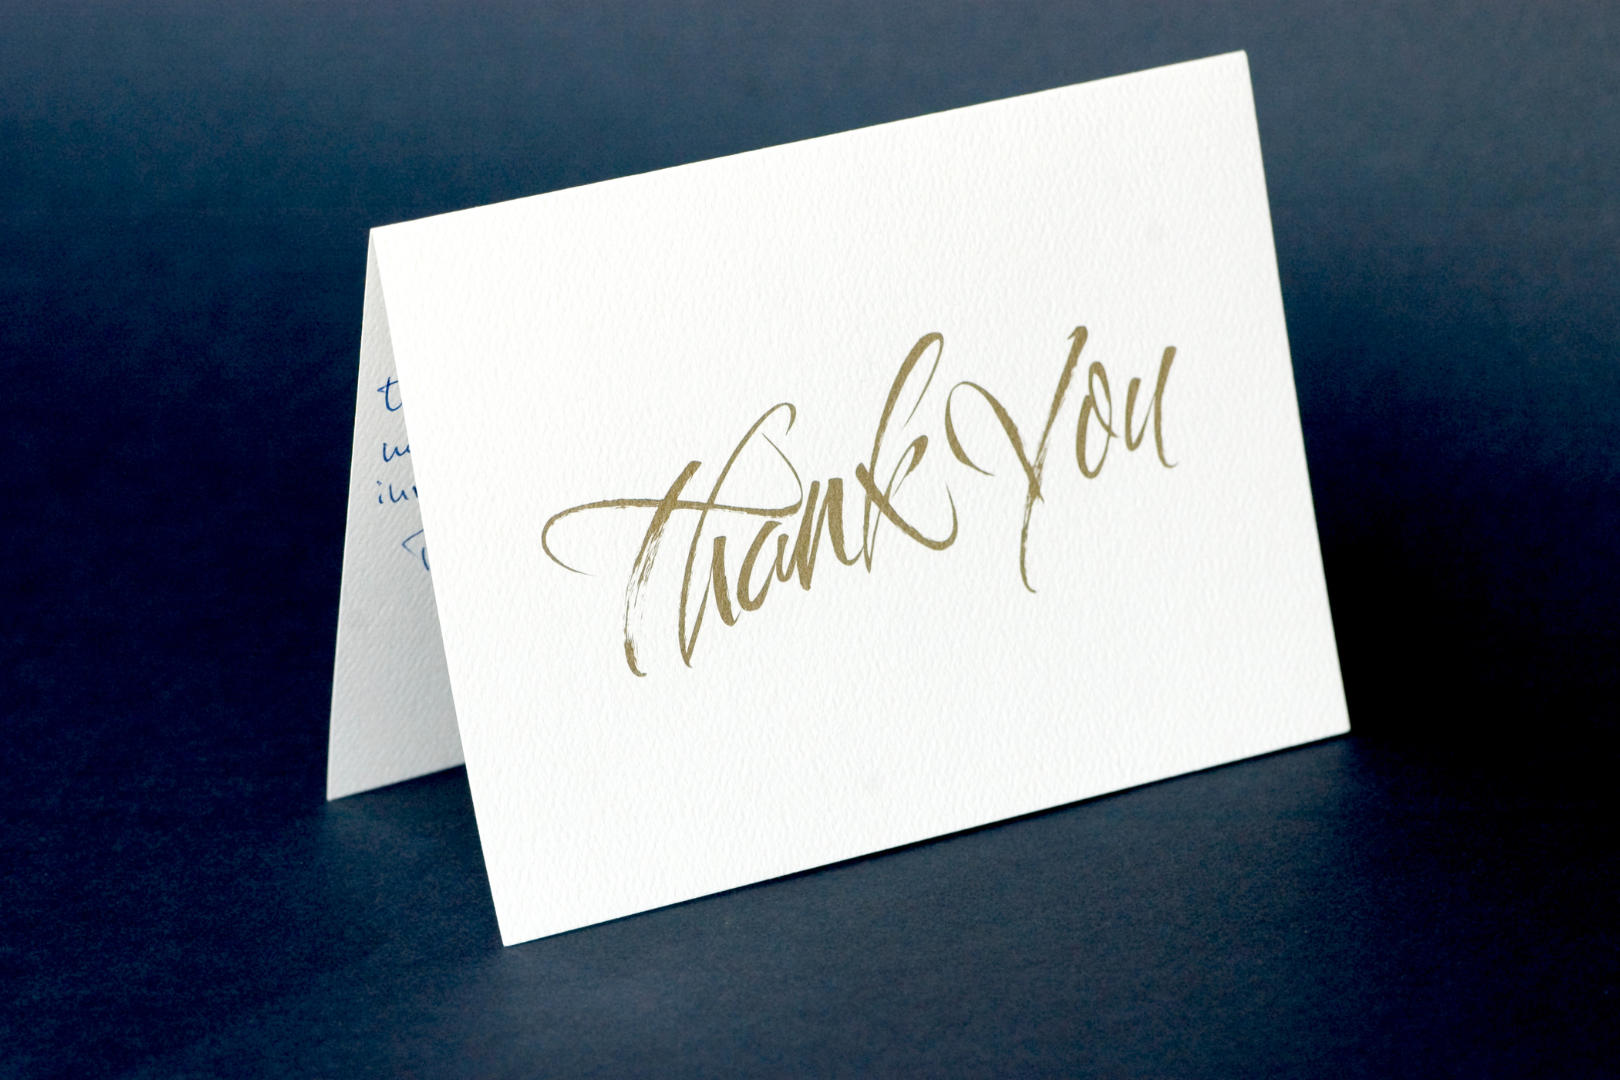 High-five worthy thank you cards to make your business stand out